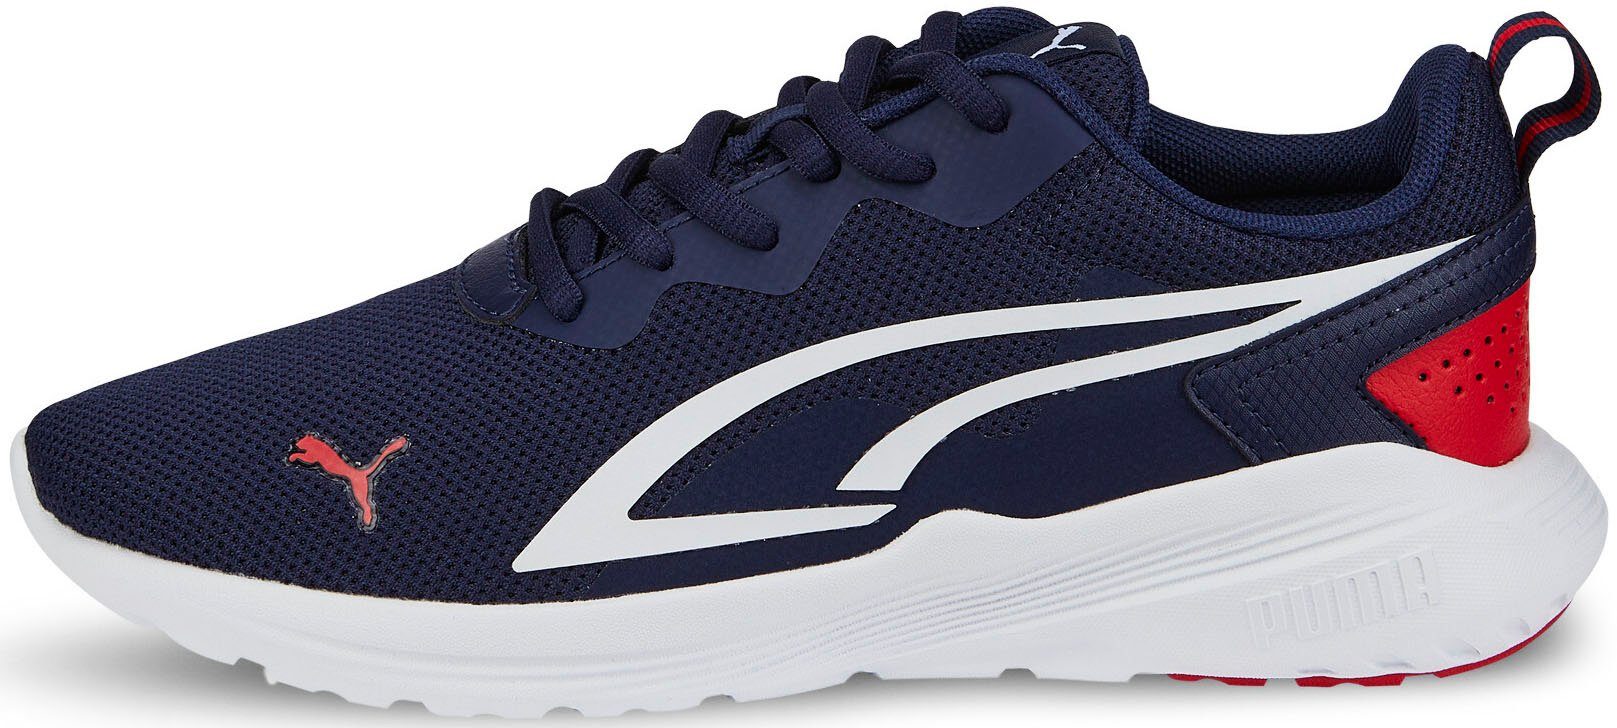 ALL-DAY ACTIVE Sneaker JR PUMA